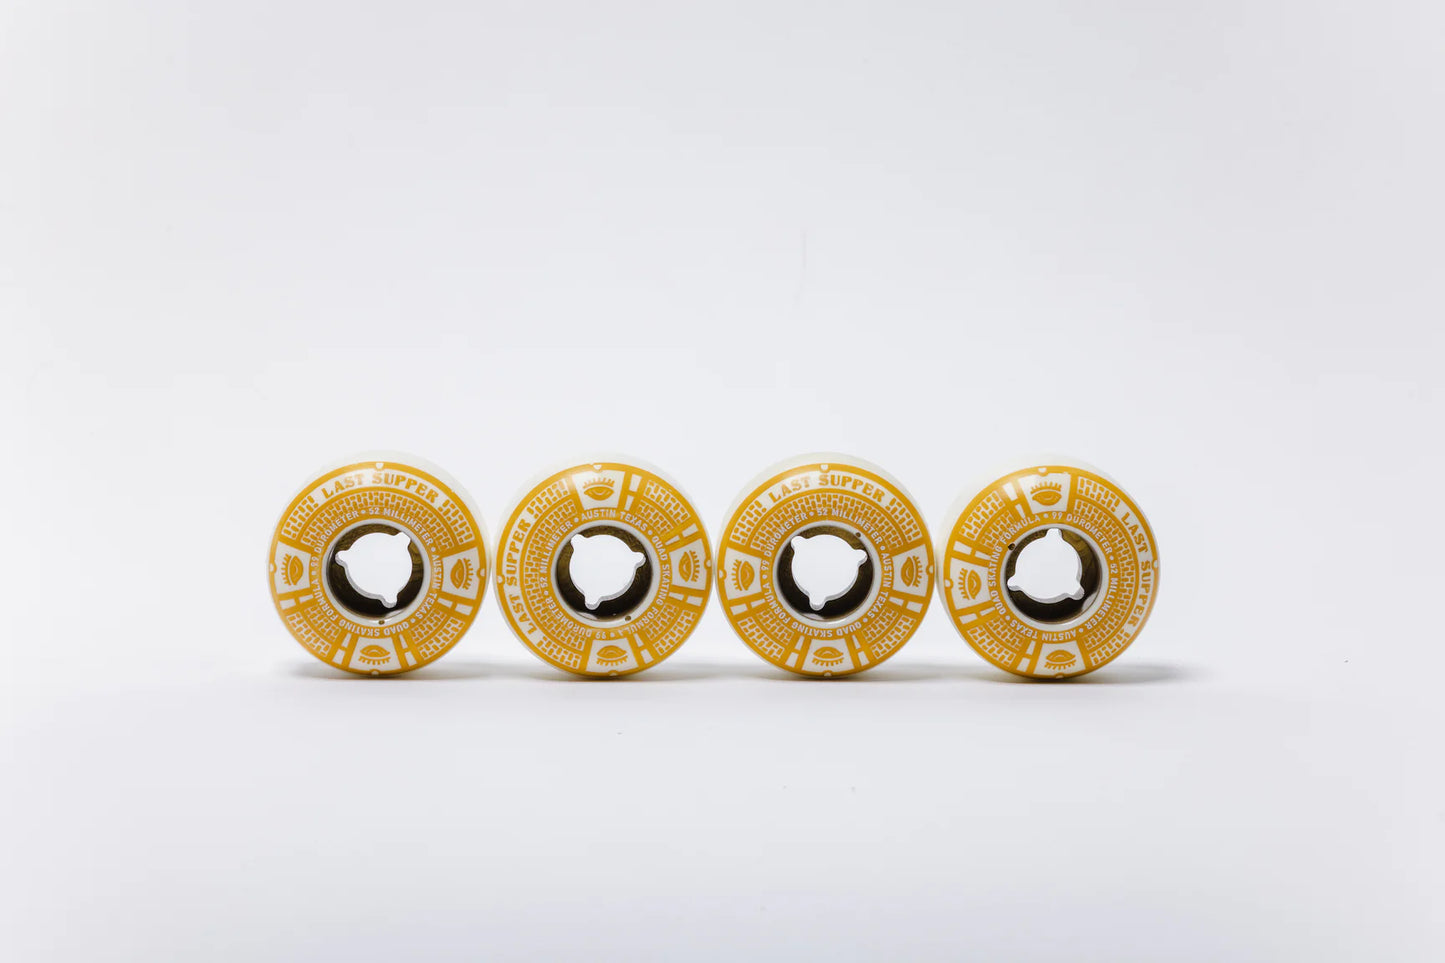 LAST SUPPER HOLYTHANE CLASIC WHEELS 99A/52MM(8-PACK)